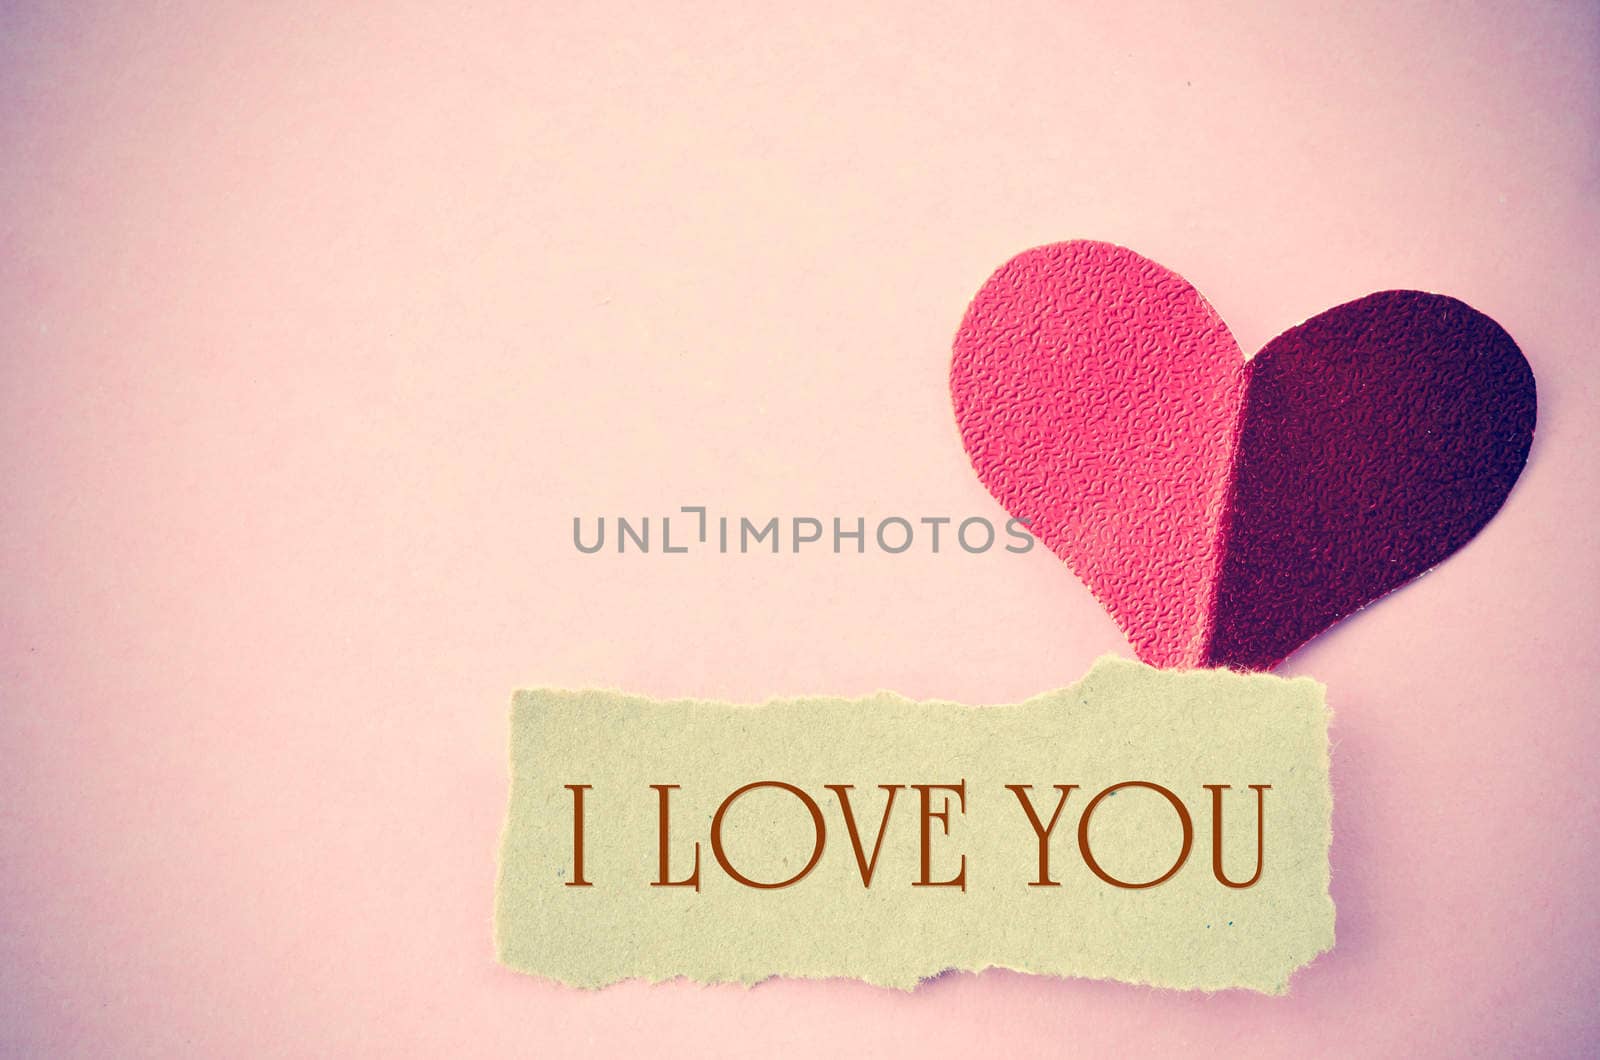 I love you message. by Gamjai